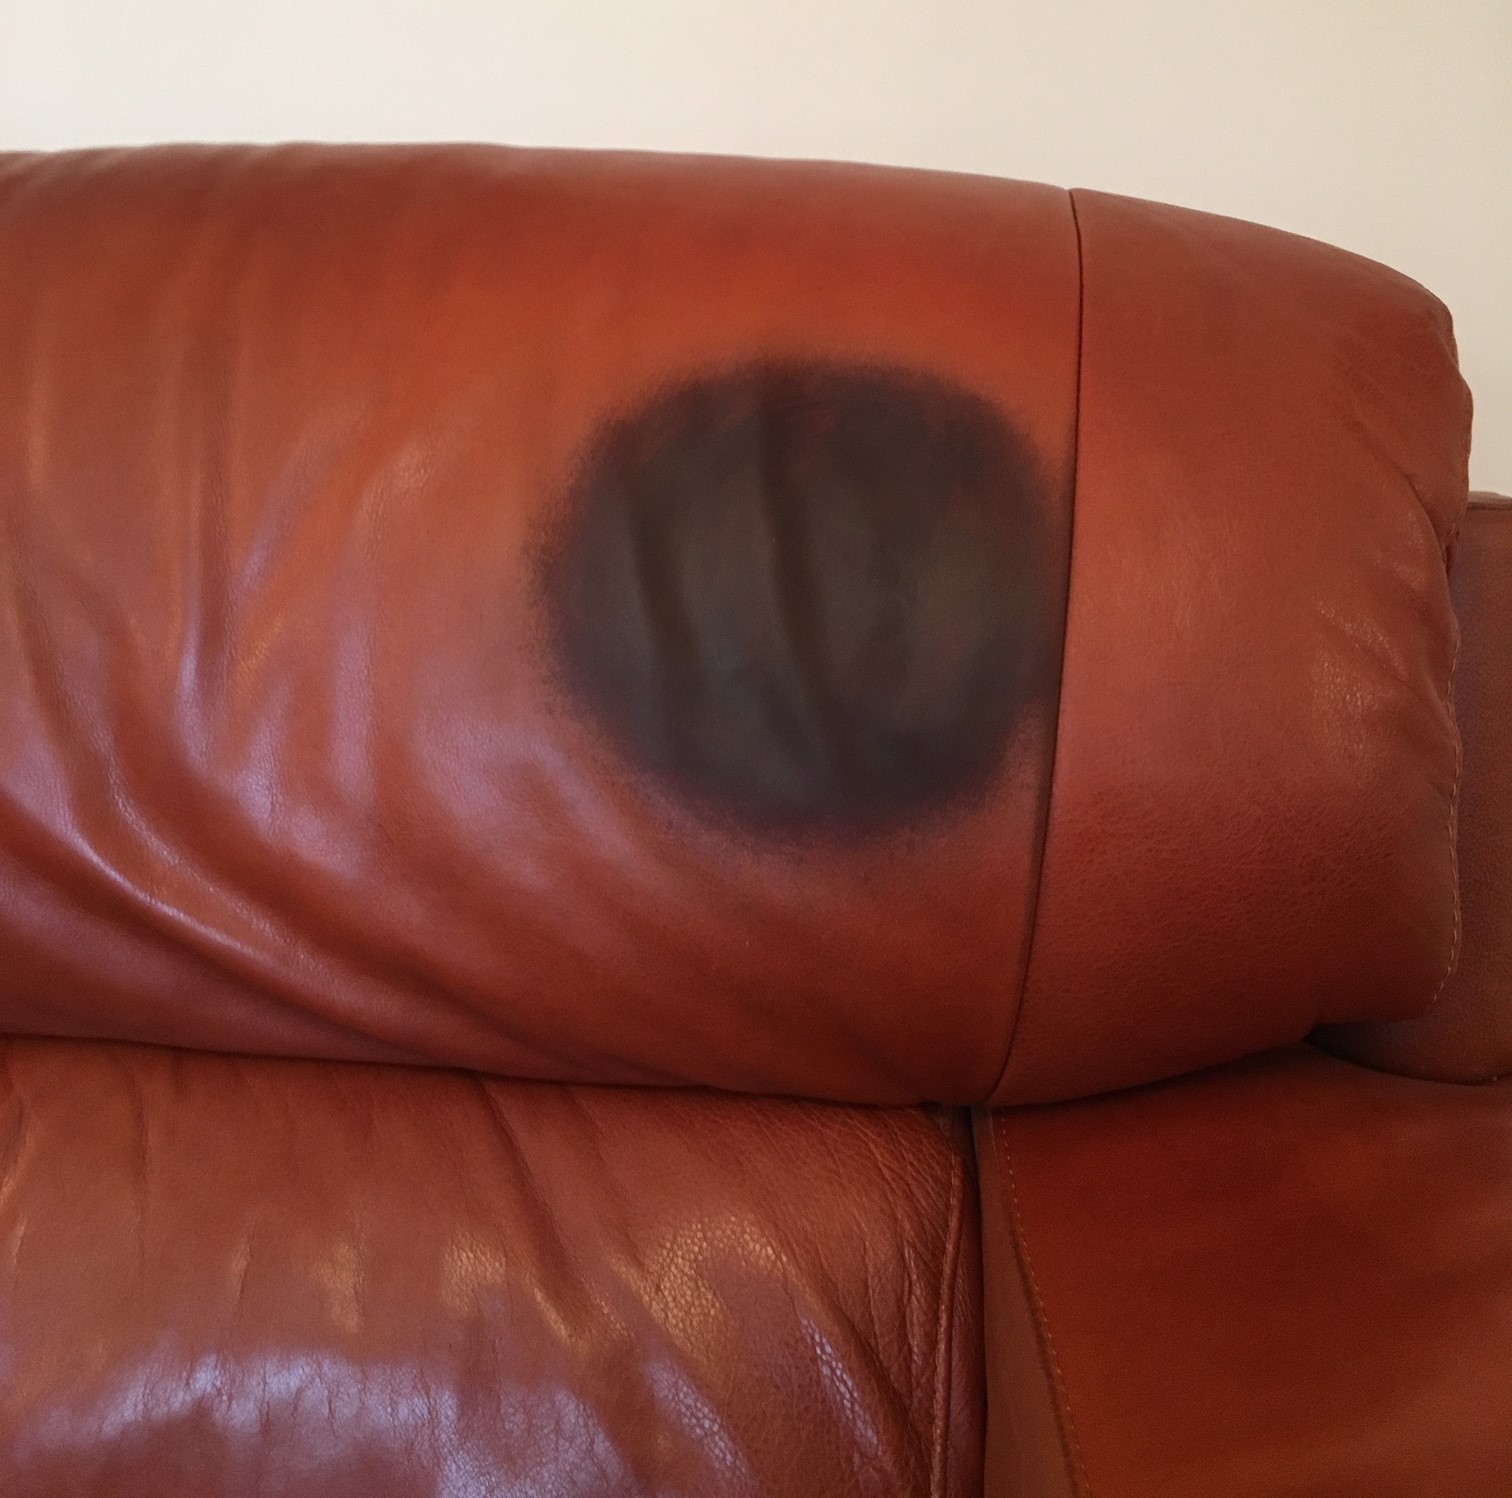 Removing Greasy stains from leather head rest